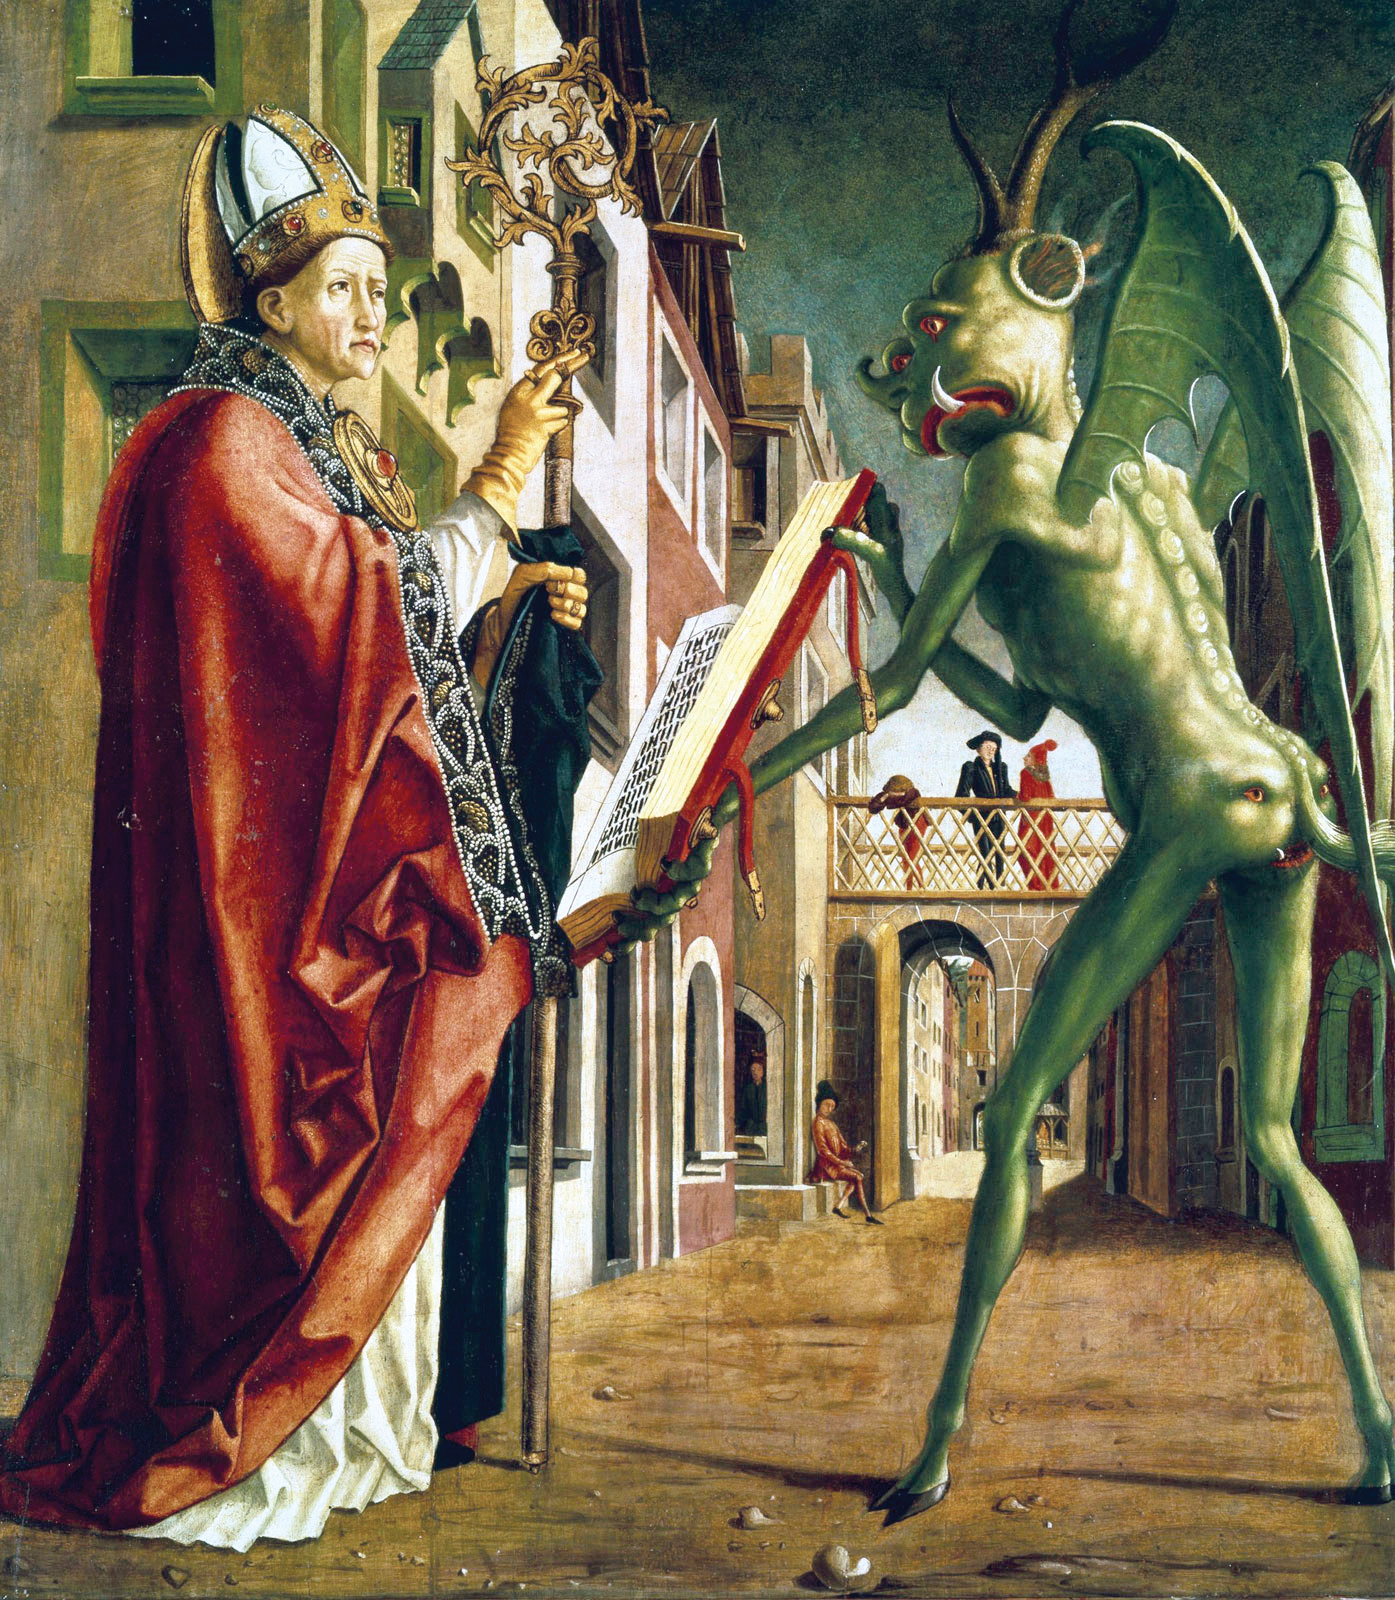 The Devil Presenting St. Augustine with the Book of Vices, by Michael Pacher